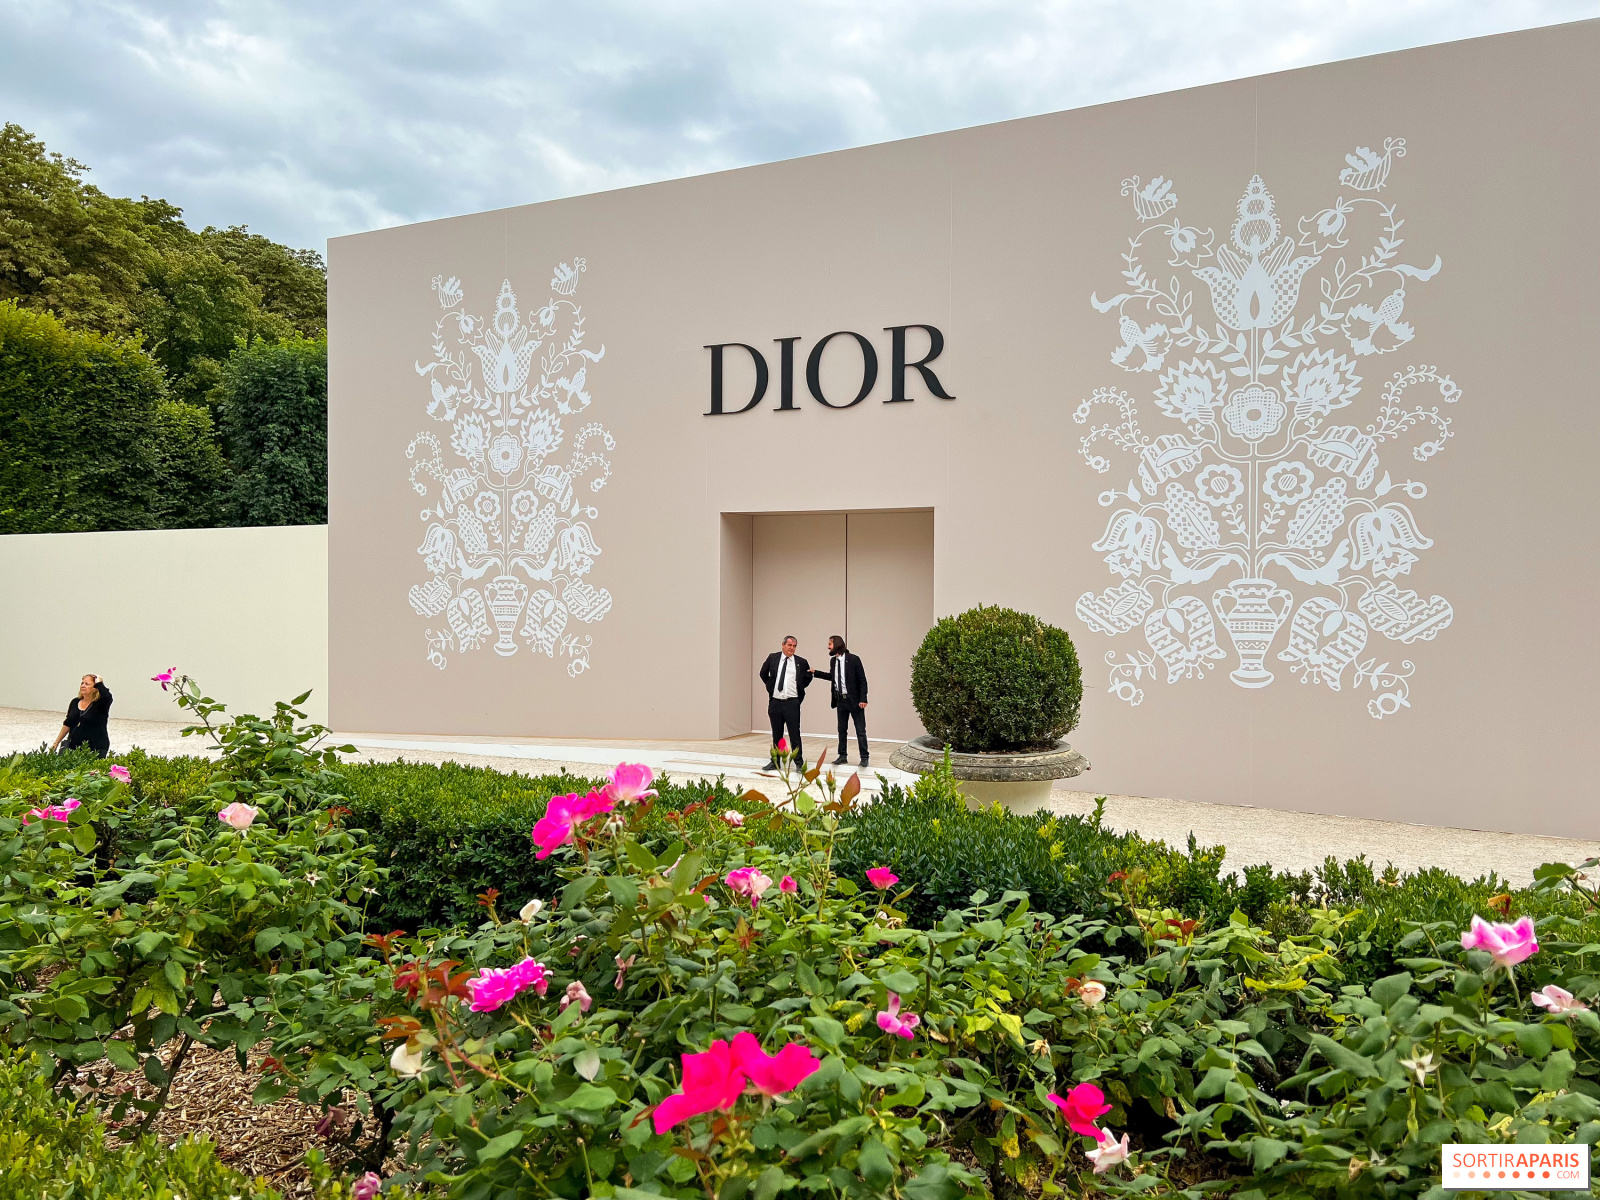 Dior Lightens Up That Old New Look - The New York Times